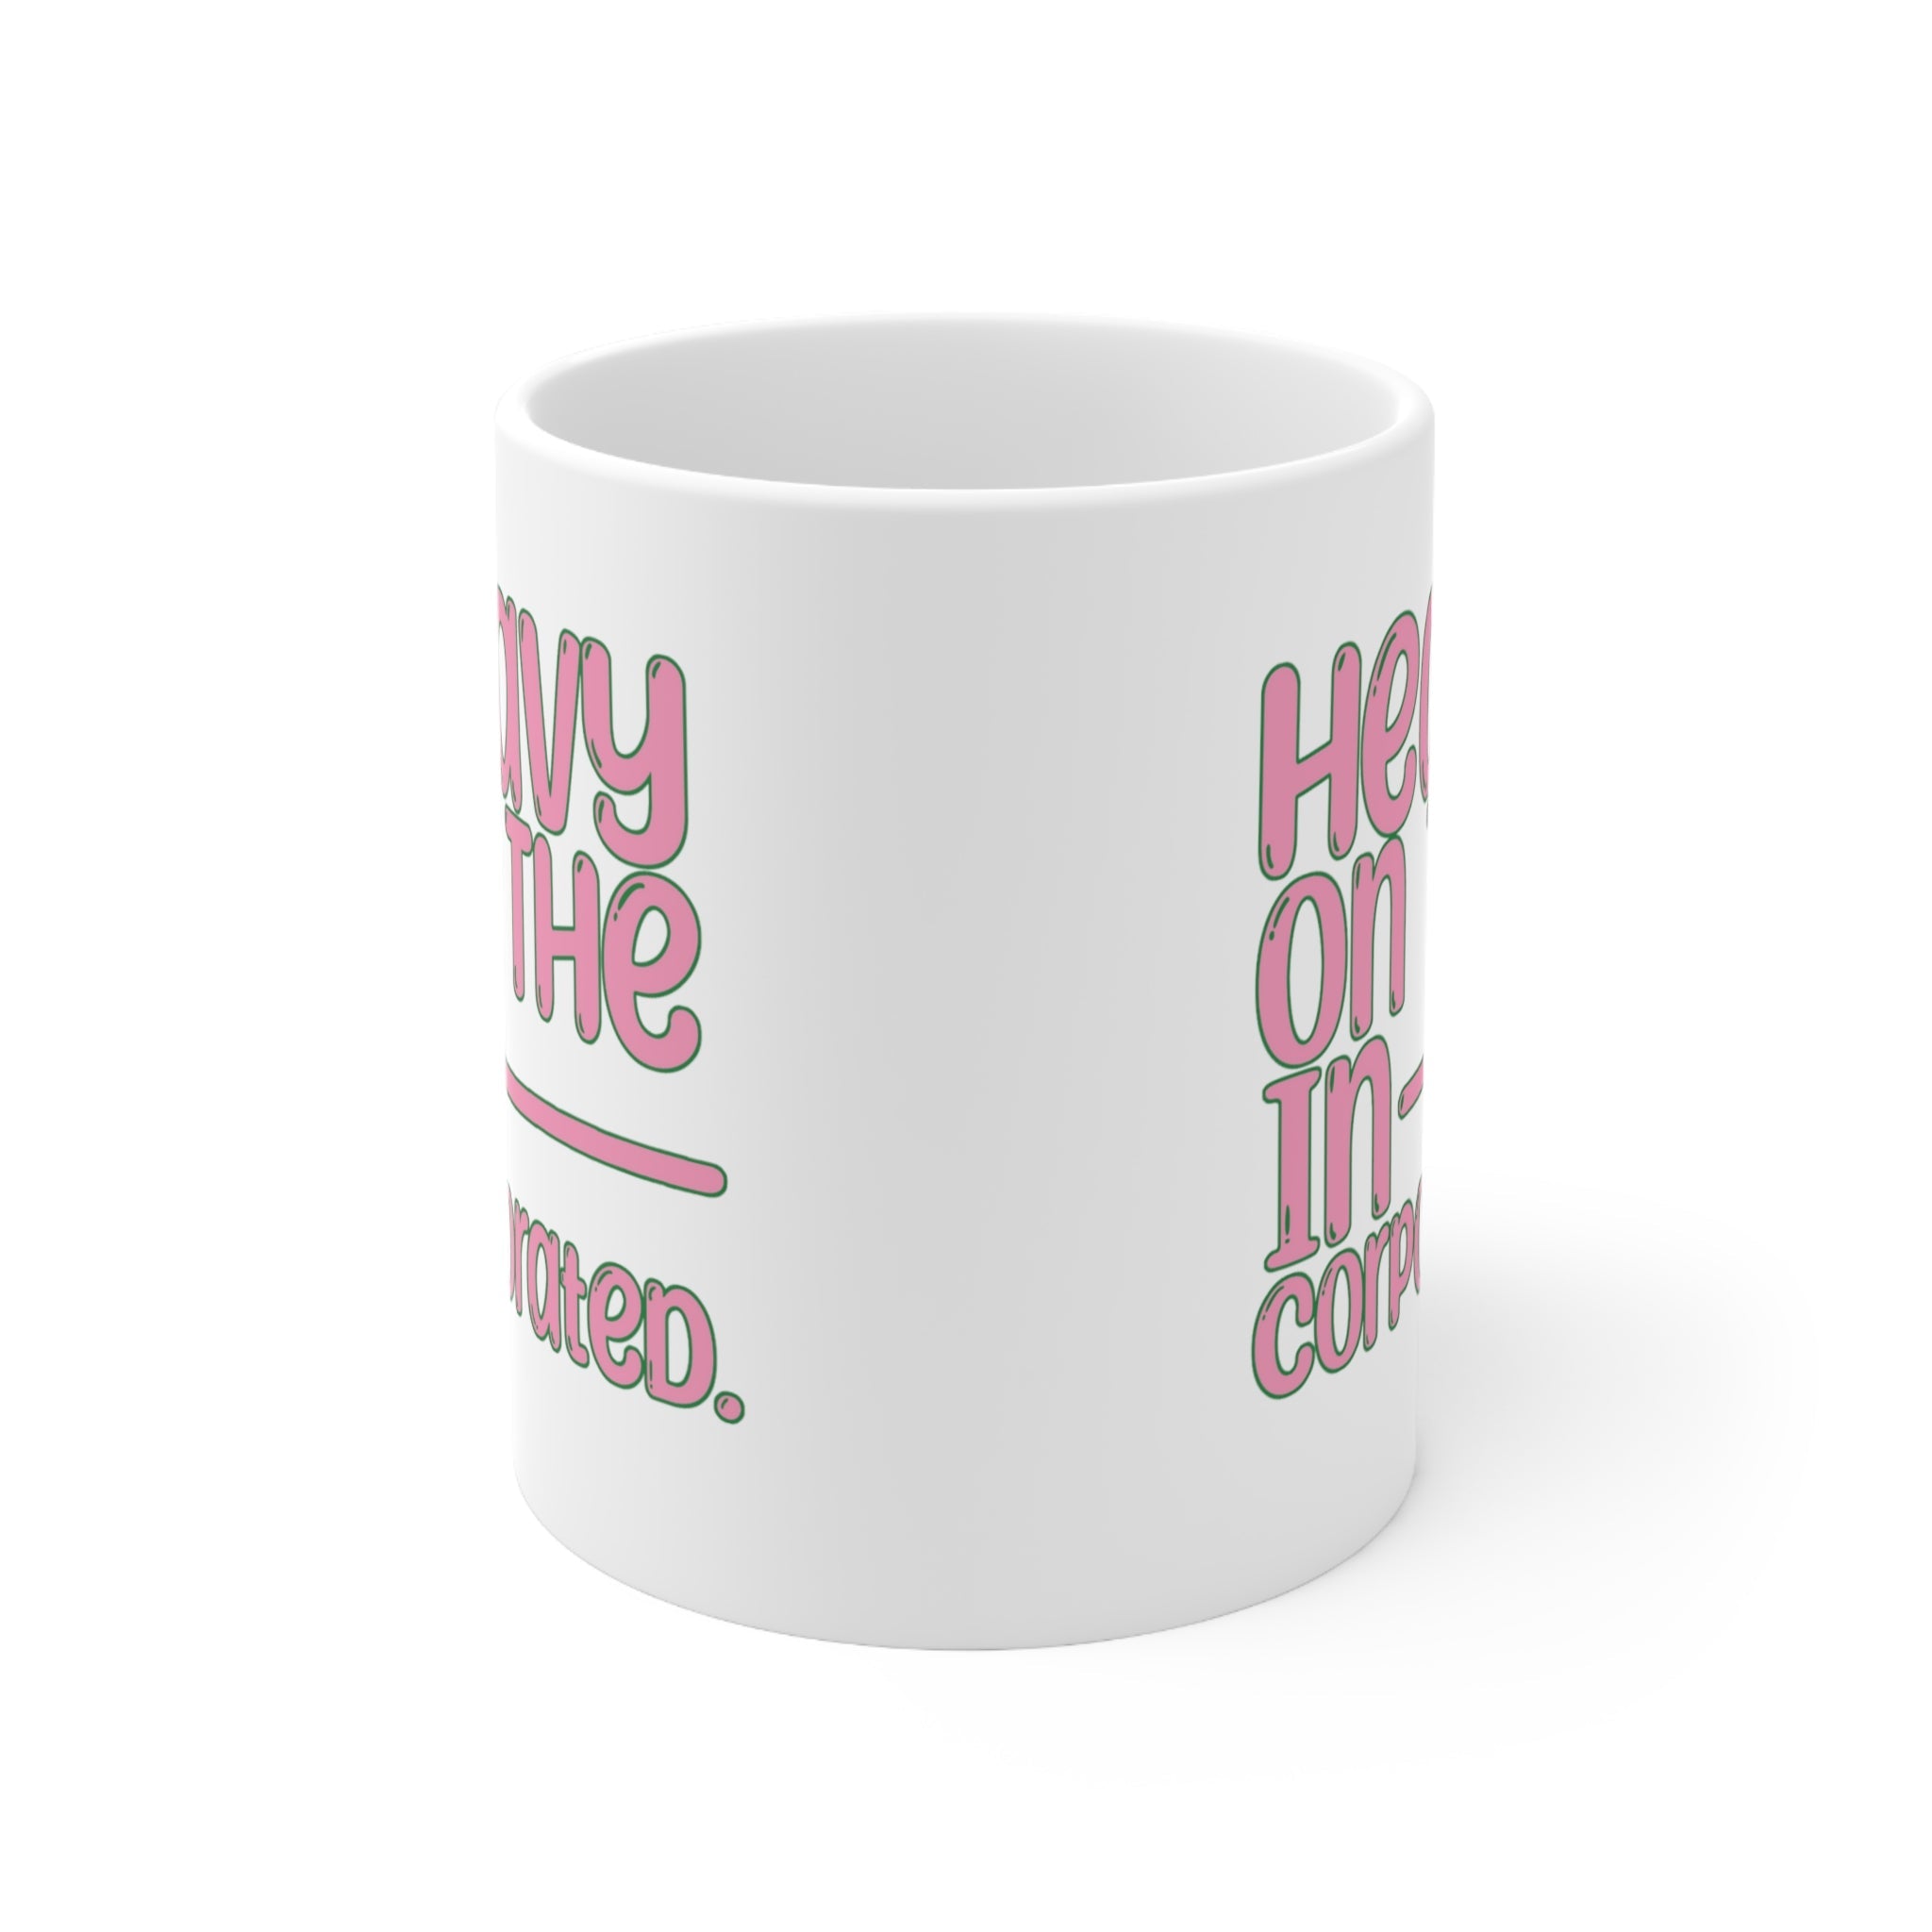 Heavy in the Incorporated Mug 11oz (White & Pink Green)-Mug-The Original God Ain't Petty But I Am